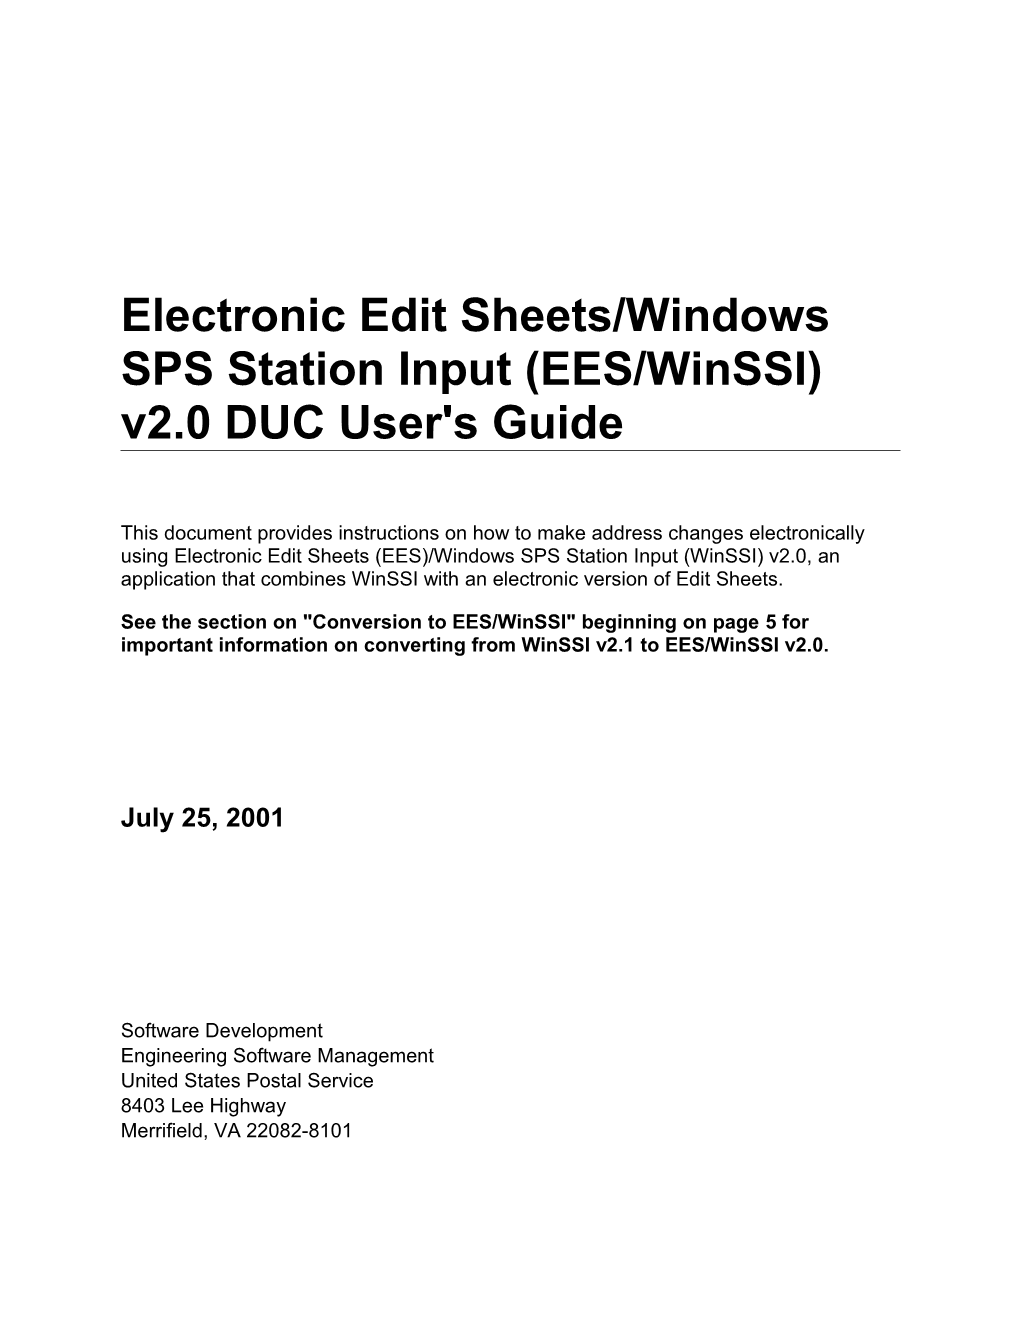 EES/Winssi V2.0 DUC User's Guidejuly 25, 2001